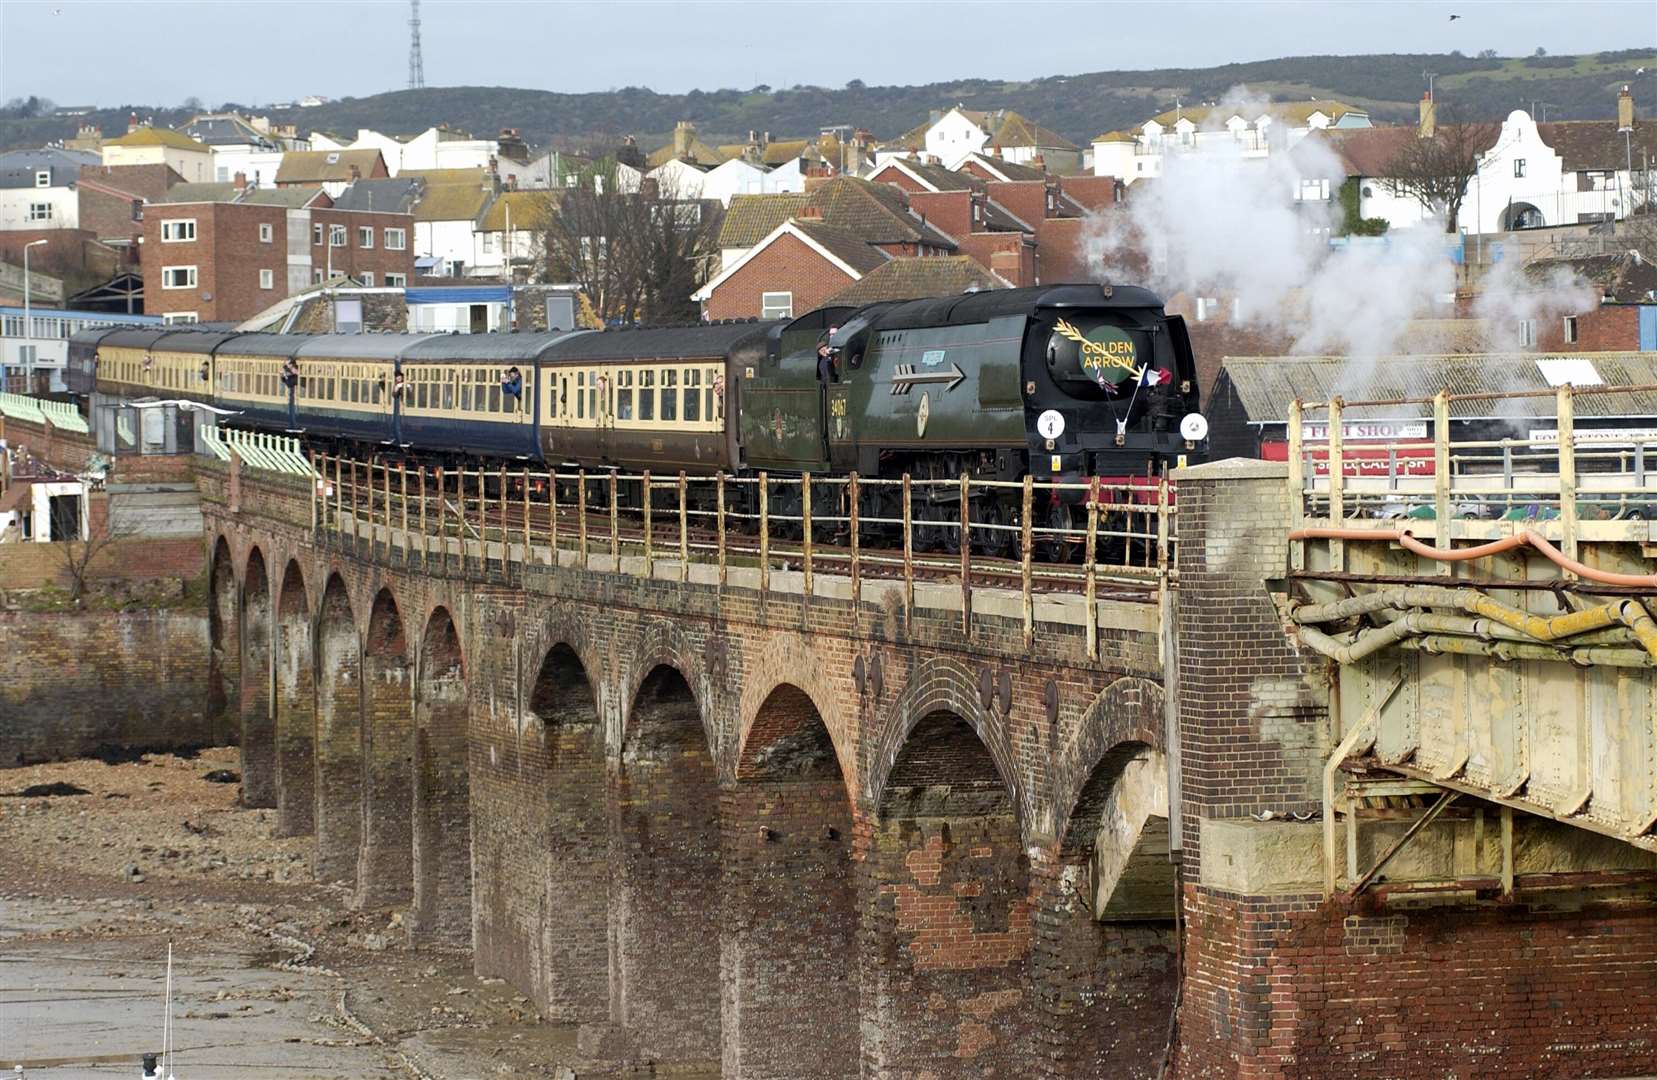 34067 Tangmere steam train arrives at Folkestone Harbour station before it shuts for good (6776001)